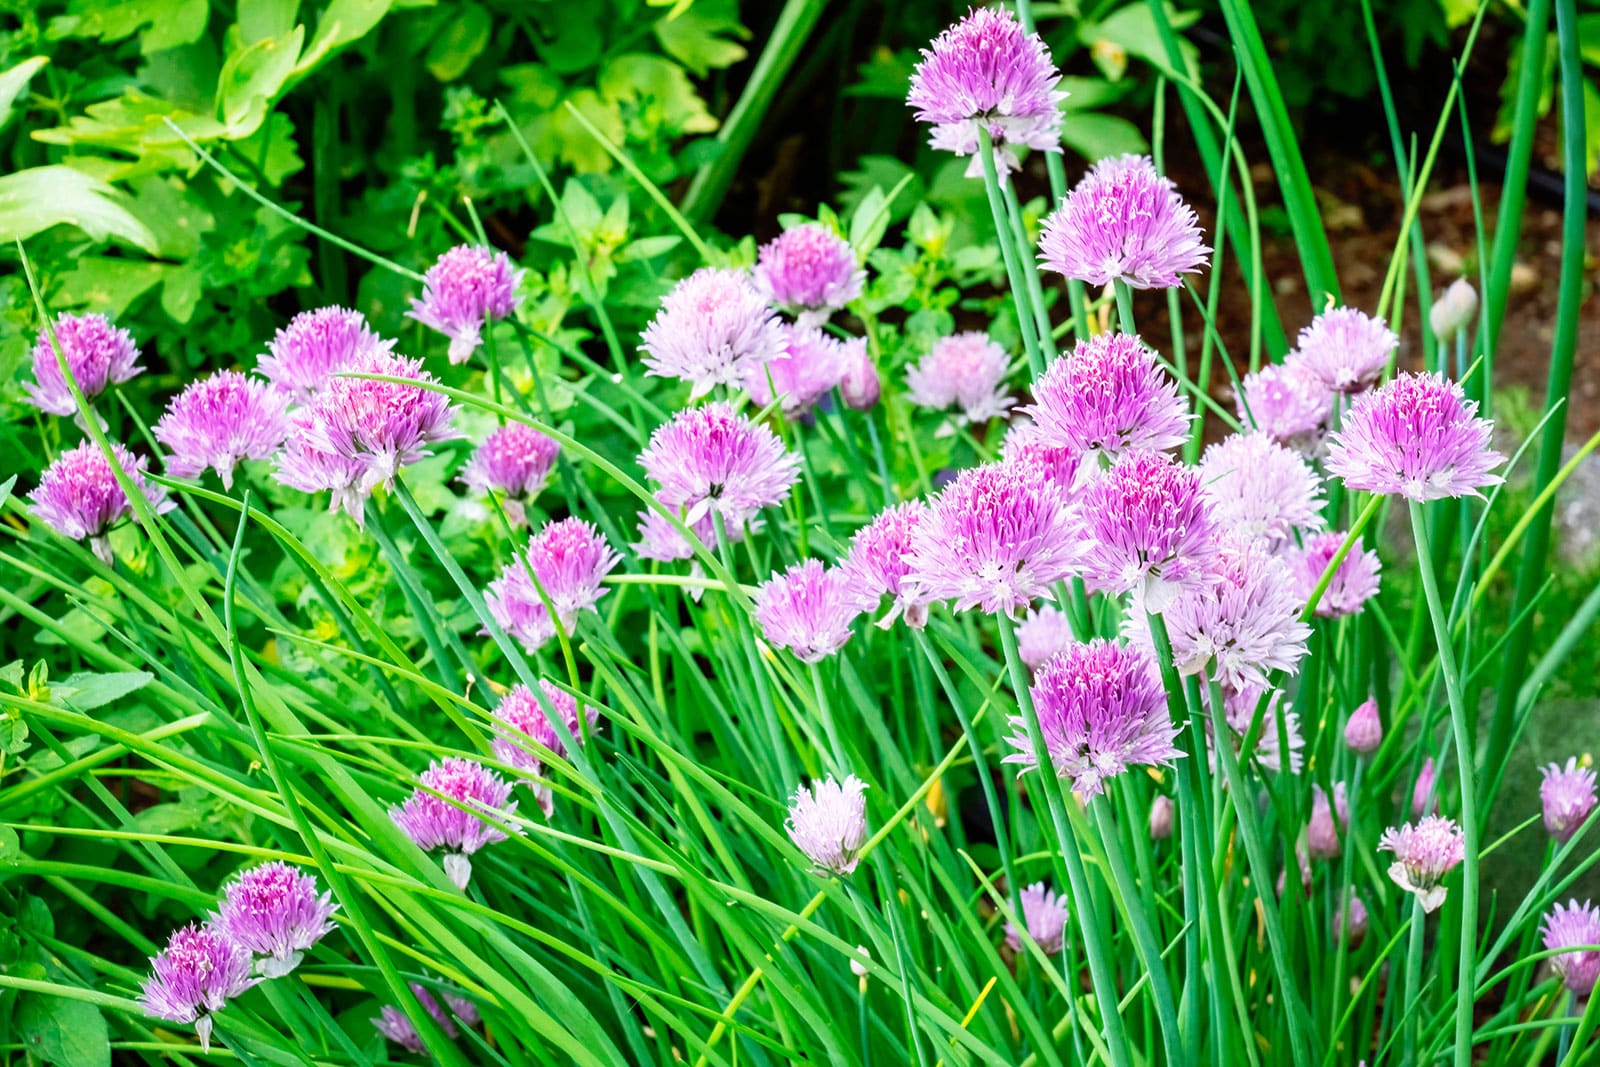 Onion chives with chive flowers